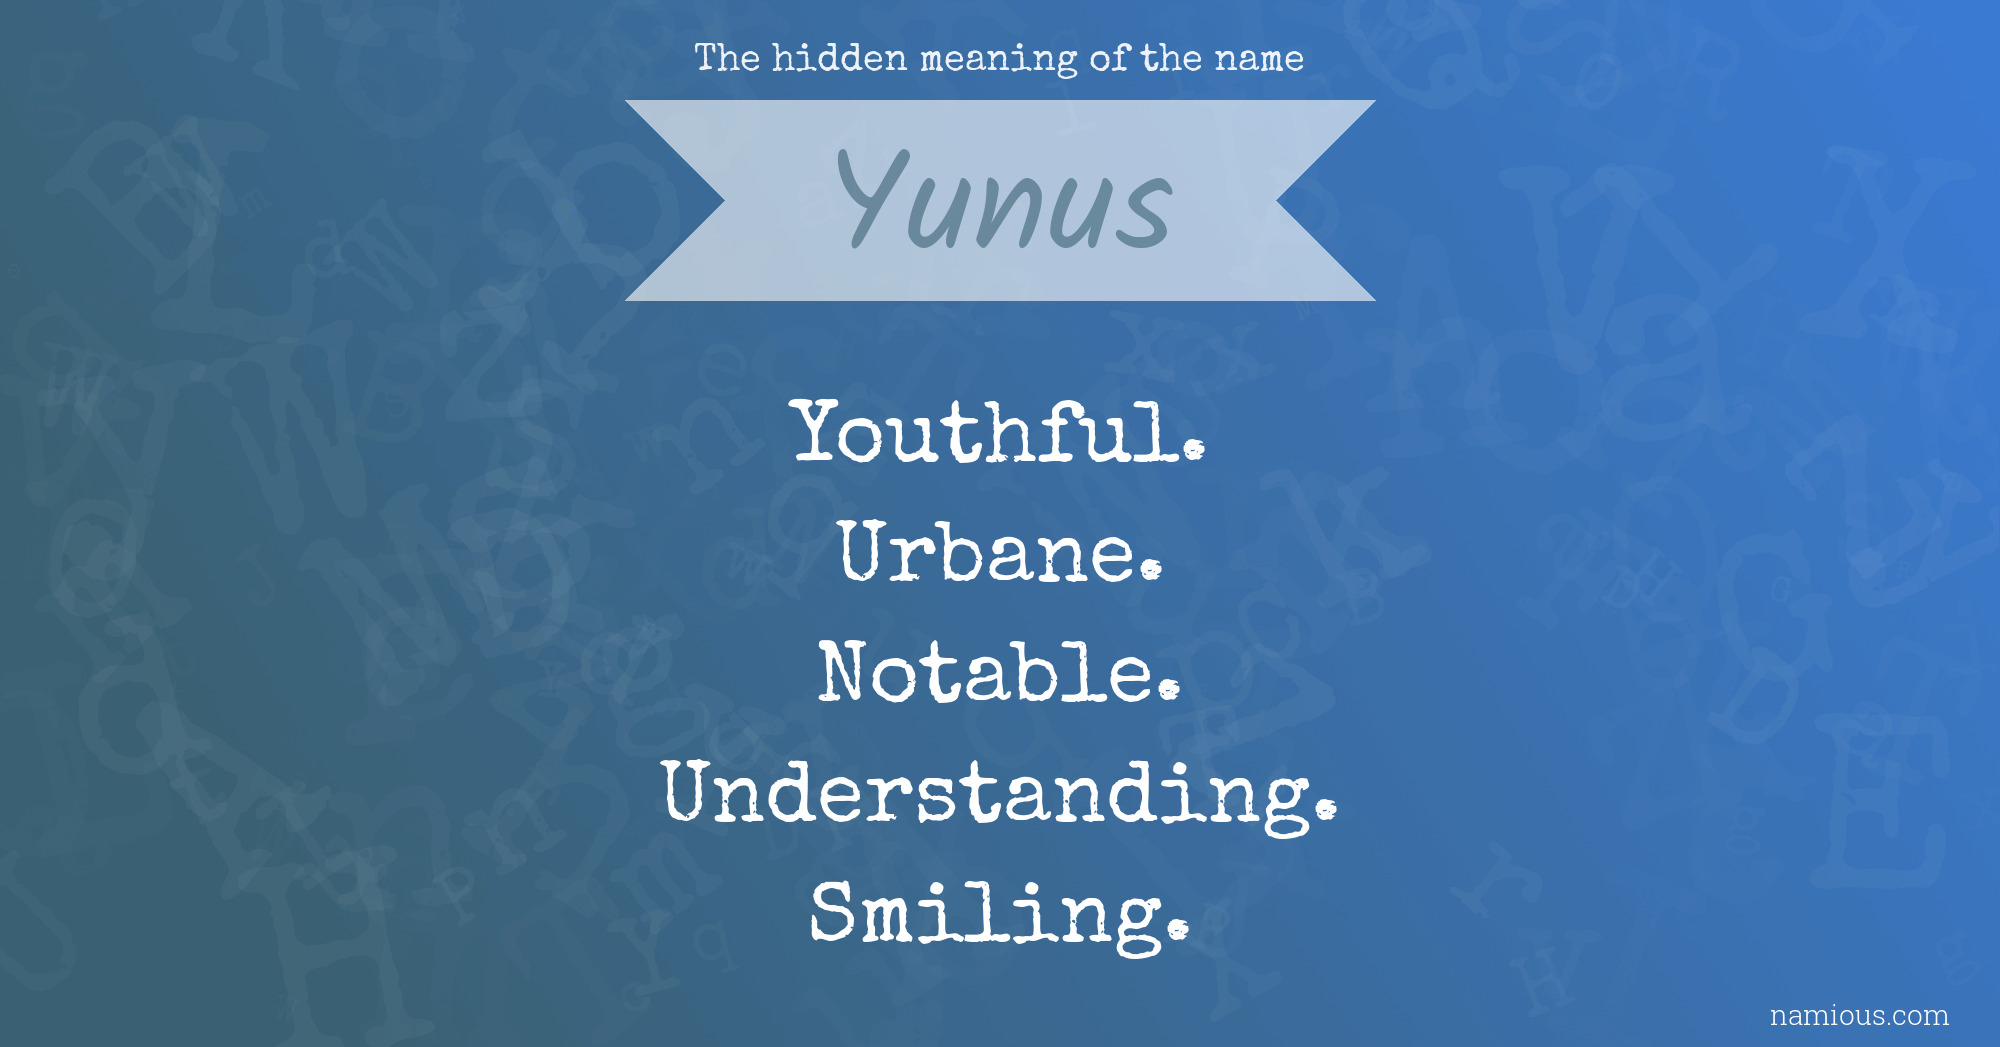 The hidden meaning of the name Yunus